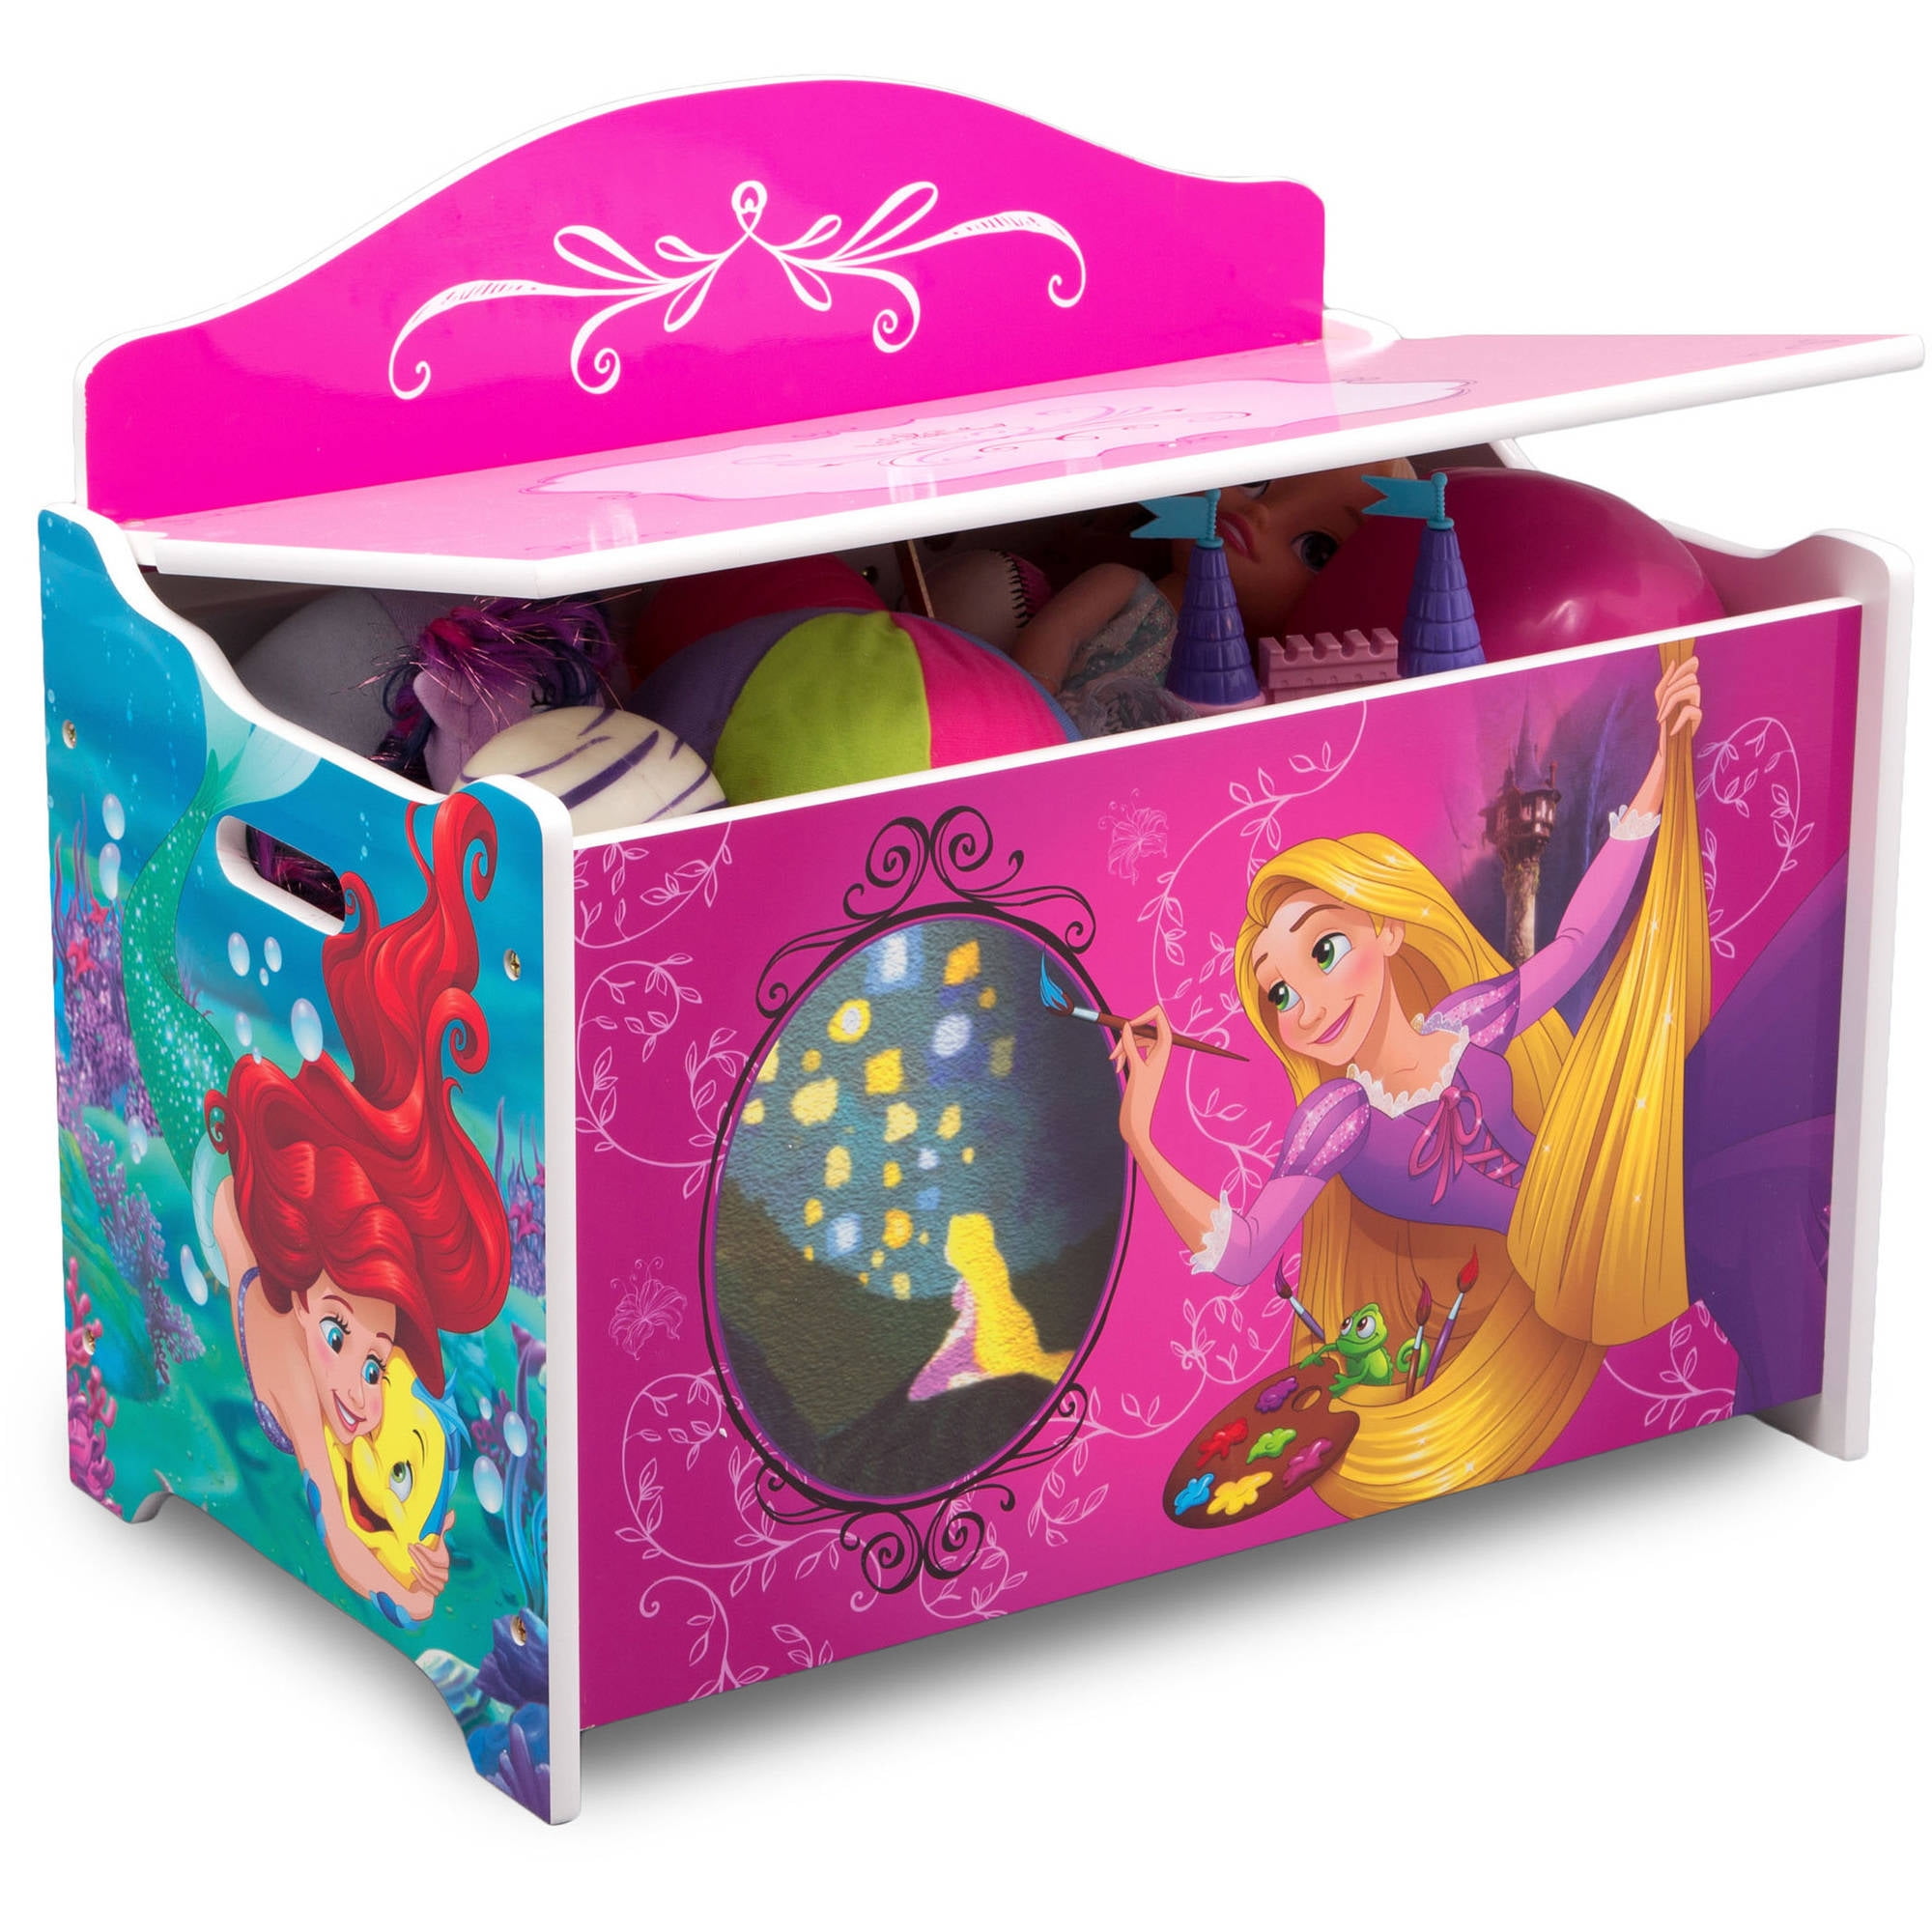 6 Pc. Princess Collection - Toys for Tots Virtual Toy Box